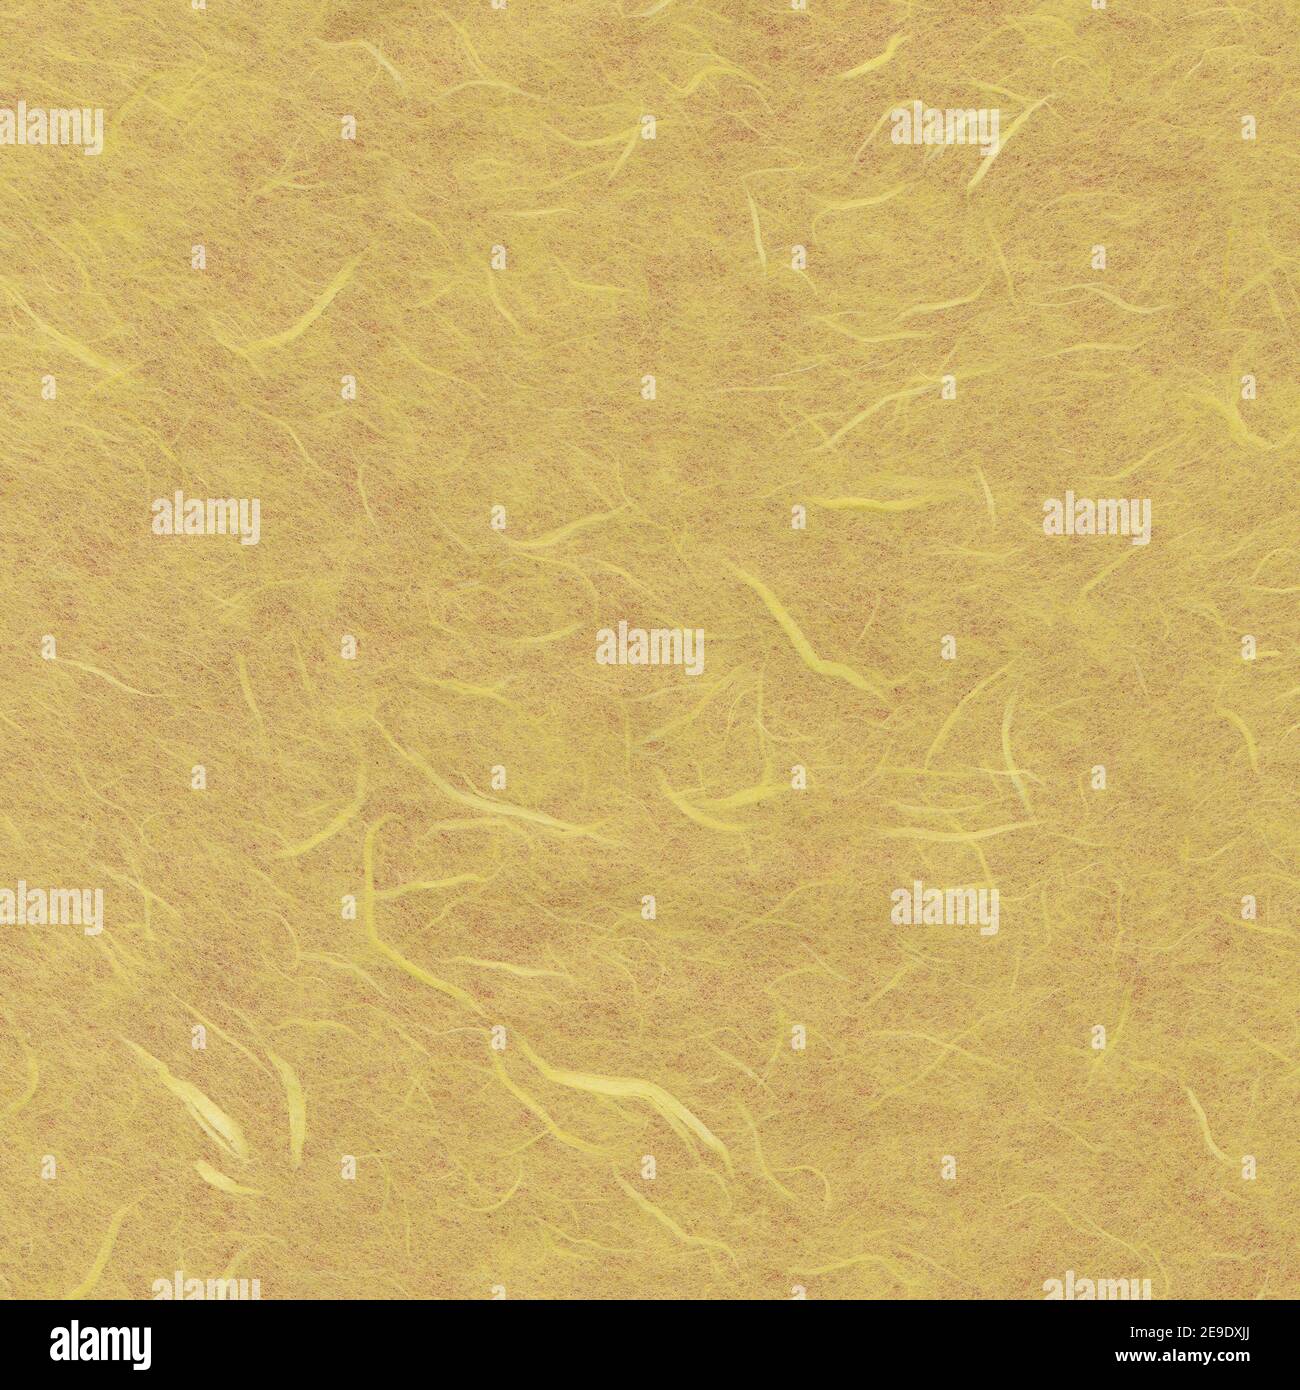 Yellow paper background with pattern Stock Photo